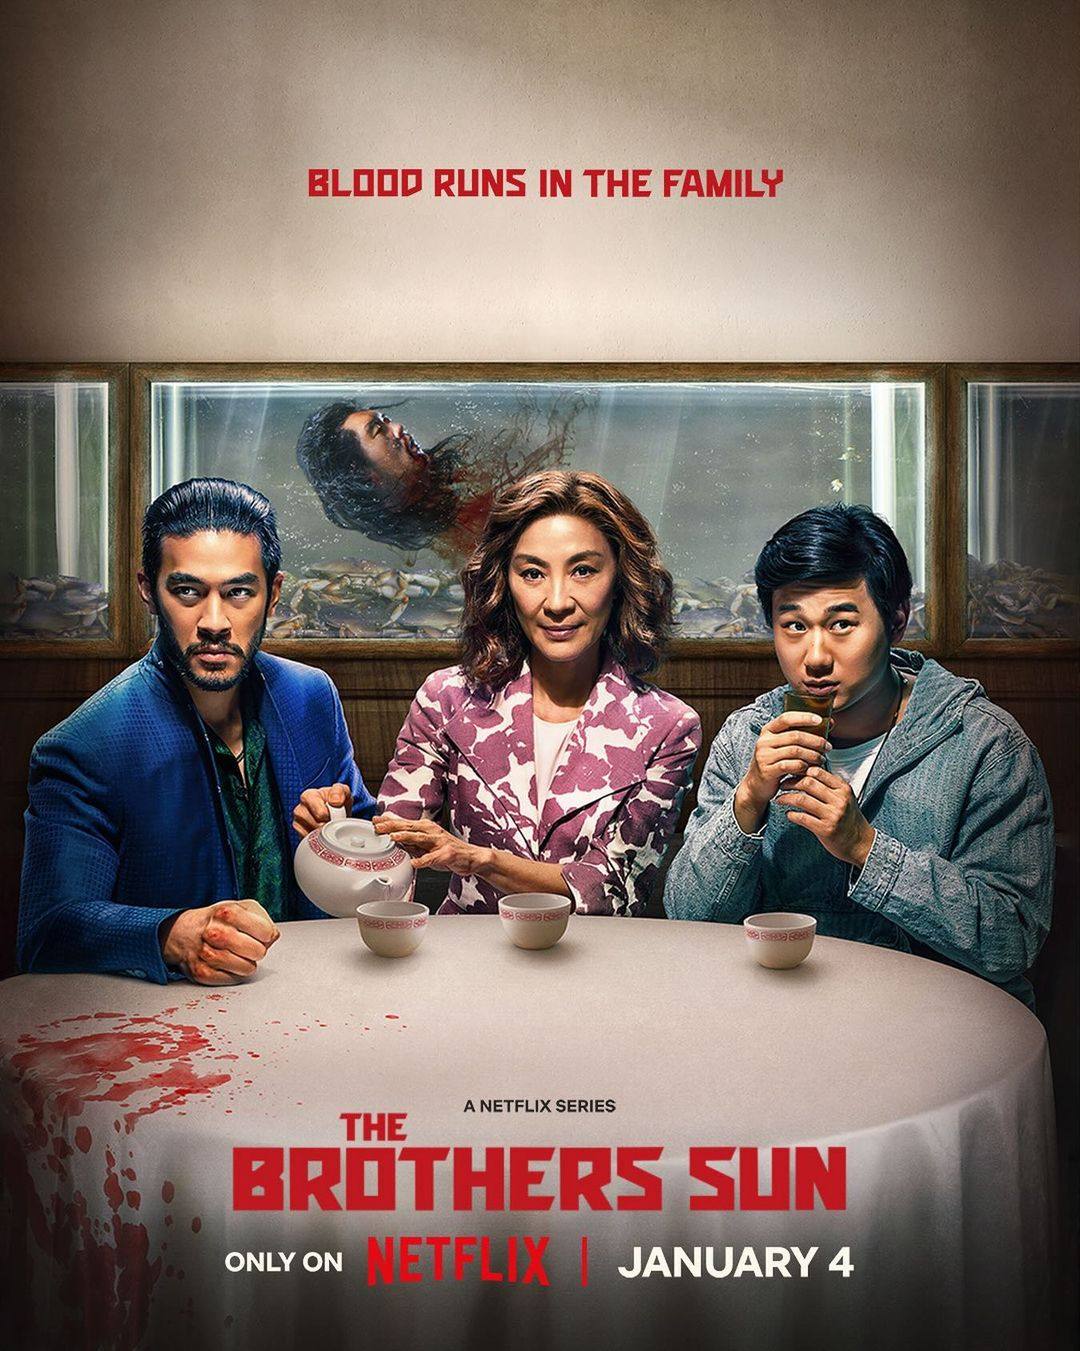 Justin Chien, Michelle Yeoh and Sam Song Li star in new Netflix series The Brothers Sun. Photo: @netflixgeeked/Instagram